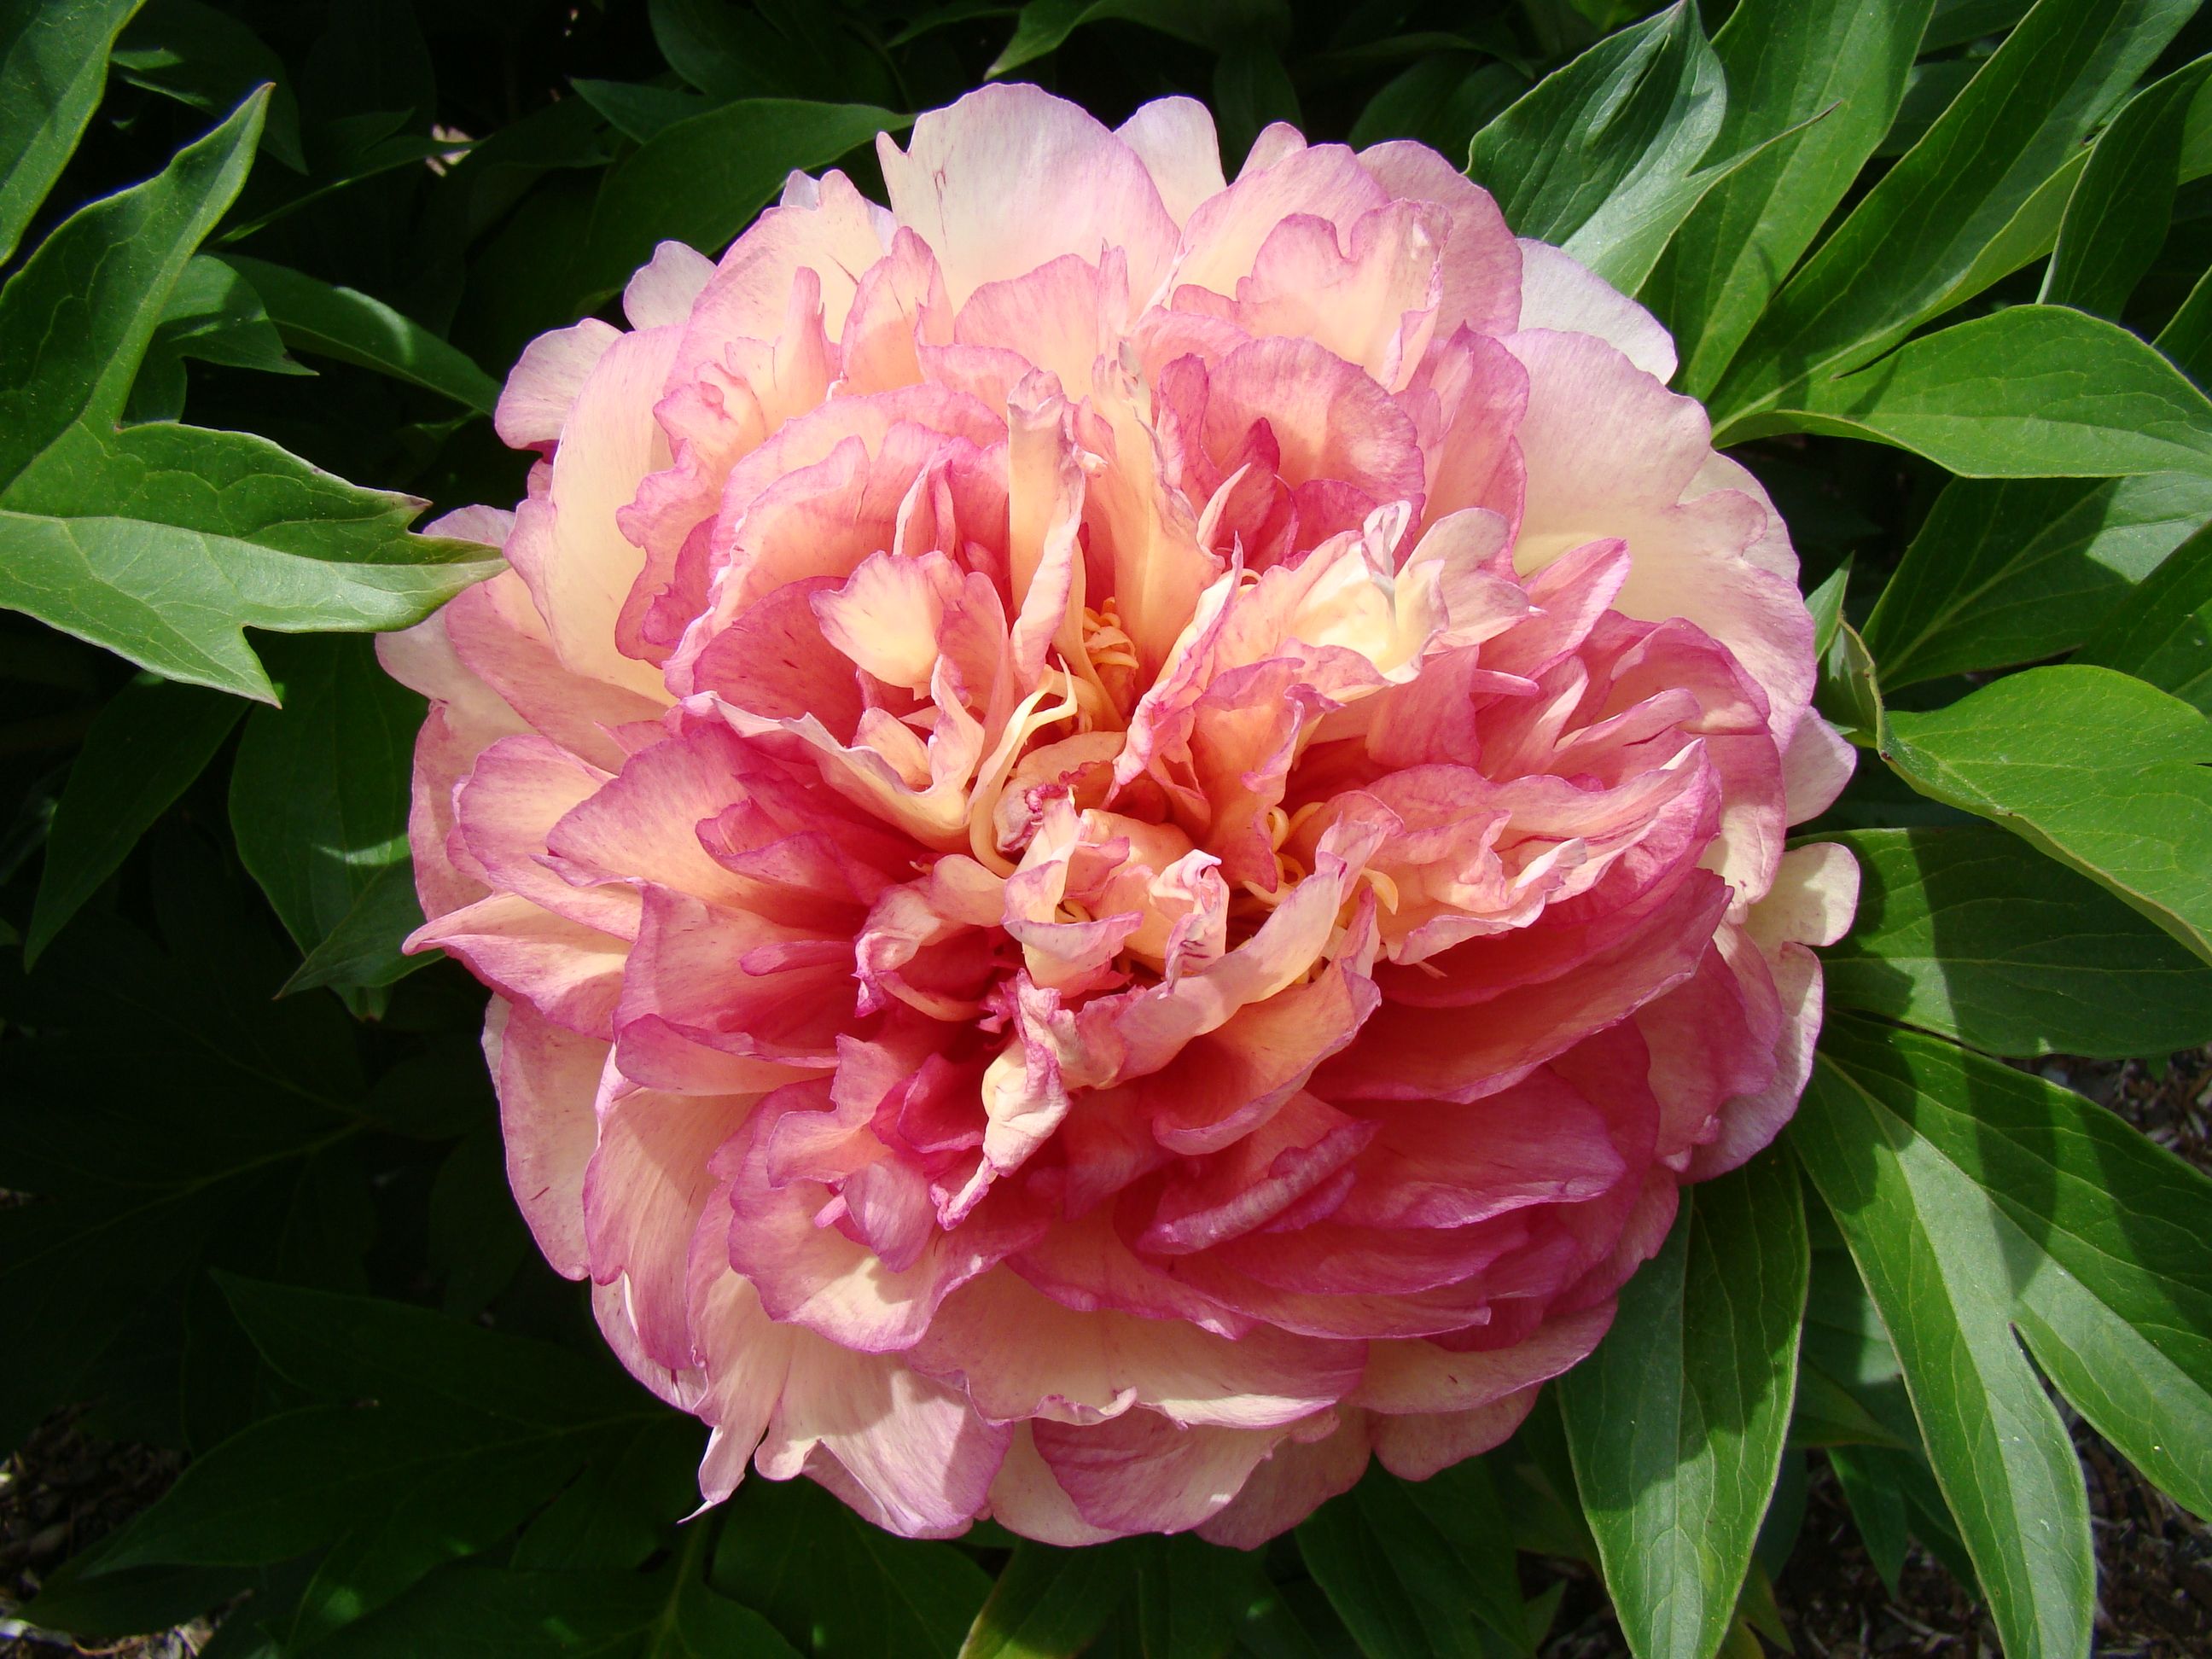 images/plants/paeonia/pae-truly-scrumptious/pae-truly-scrumptious-0009.JPG